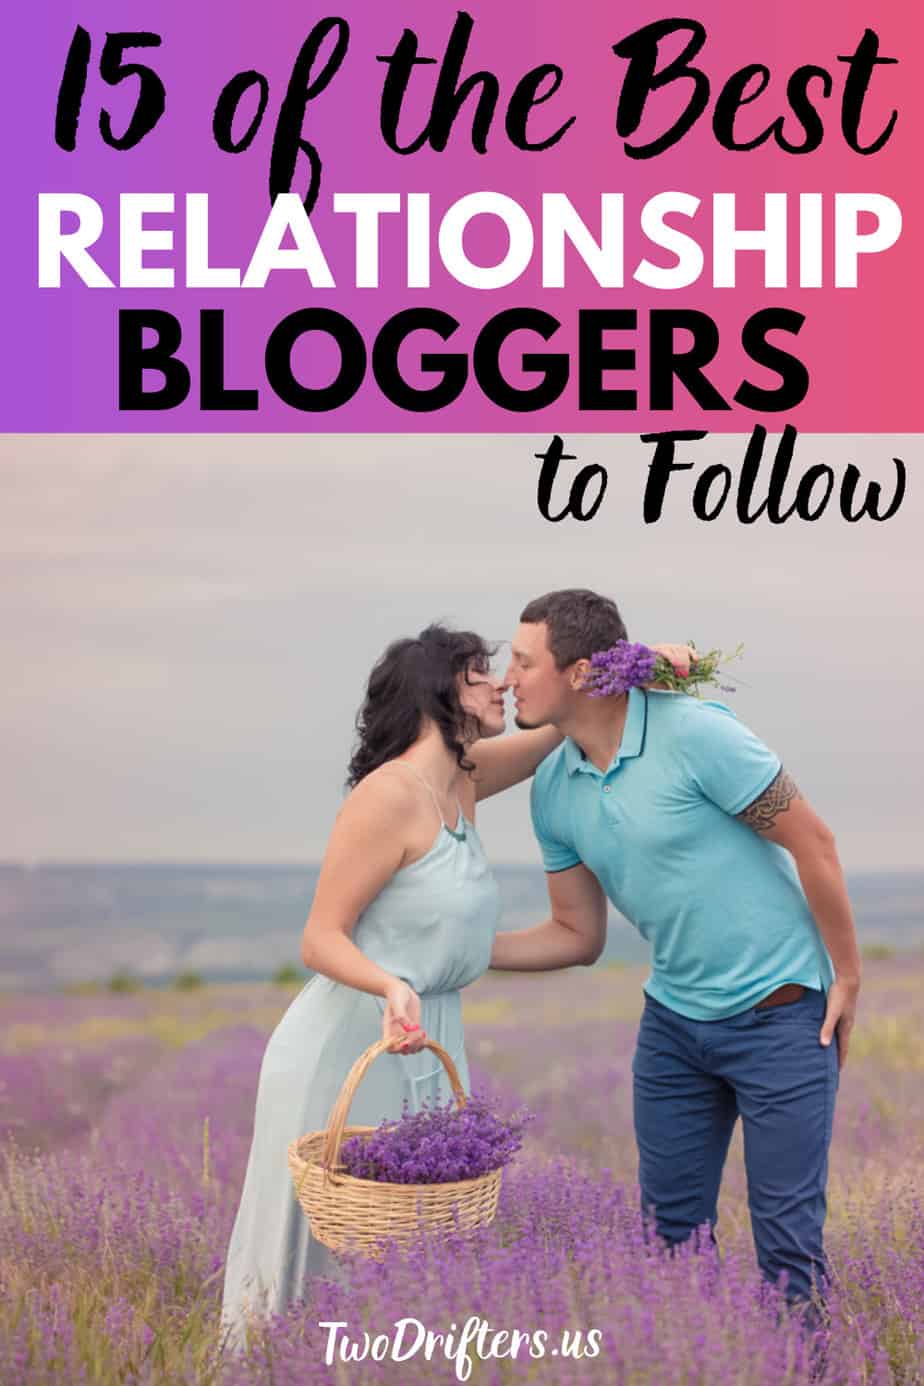 Pinterest social share image that says "15 of the Best Relationship Bloggers to Follow."